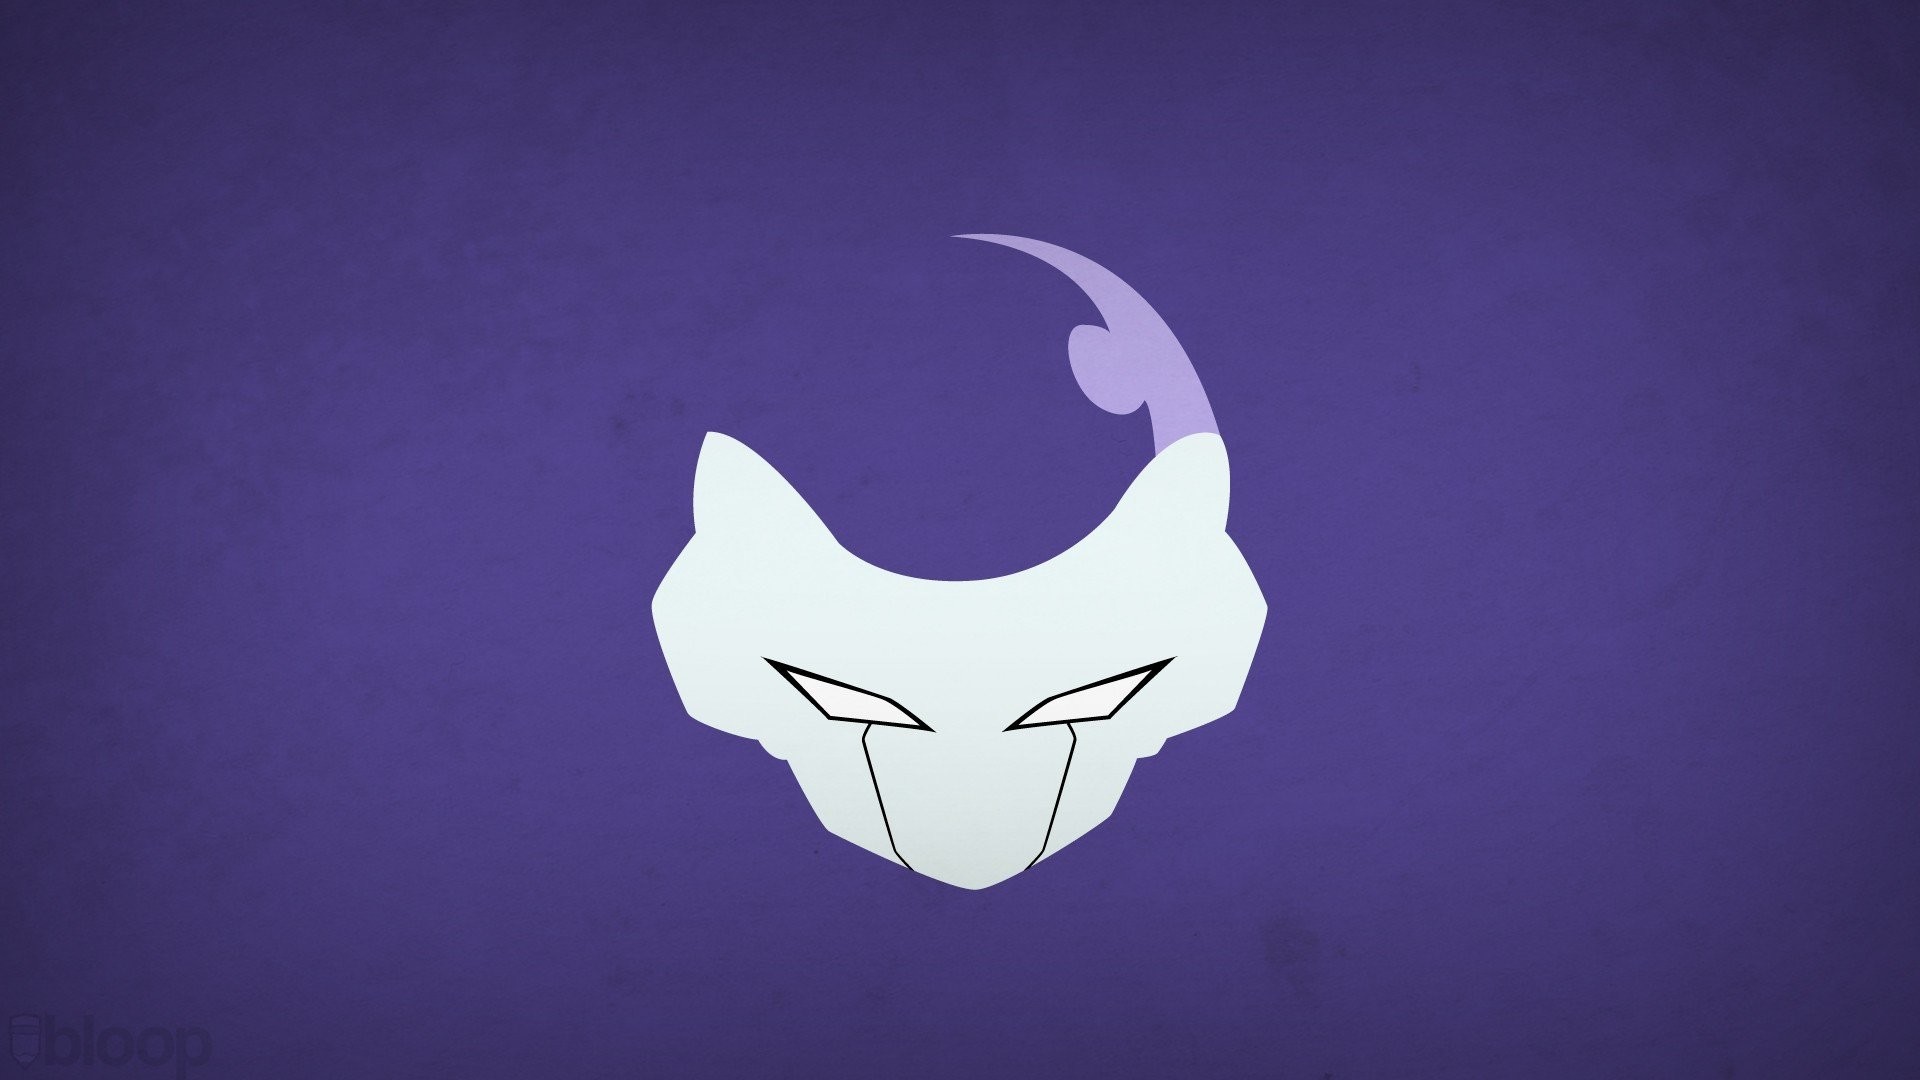 1920x1080 Minimalism Dragon Ball Frieza Superheroes free iPhone or Android Full HD  wallpaper.